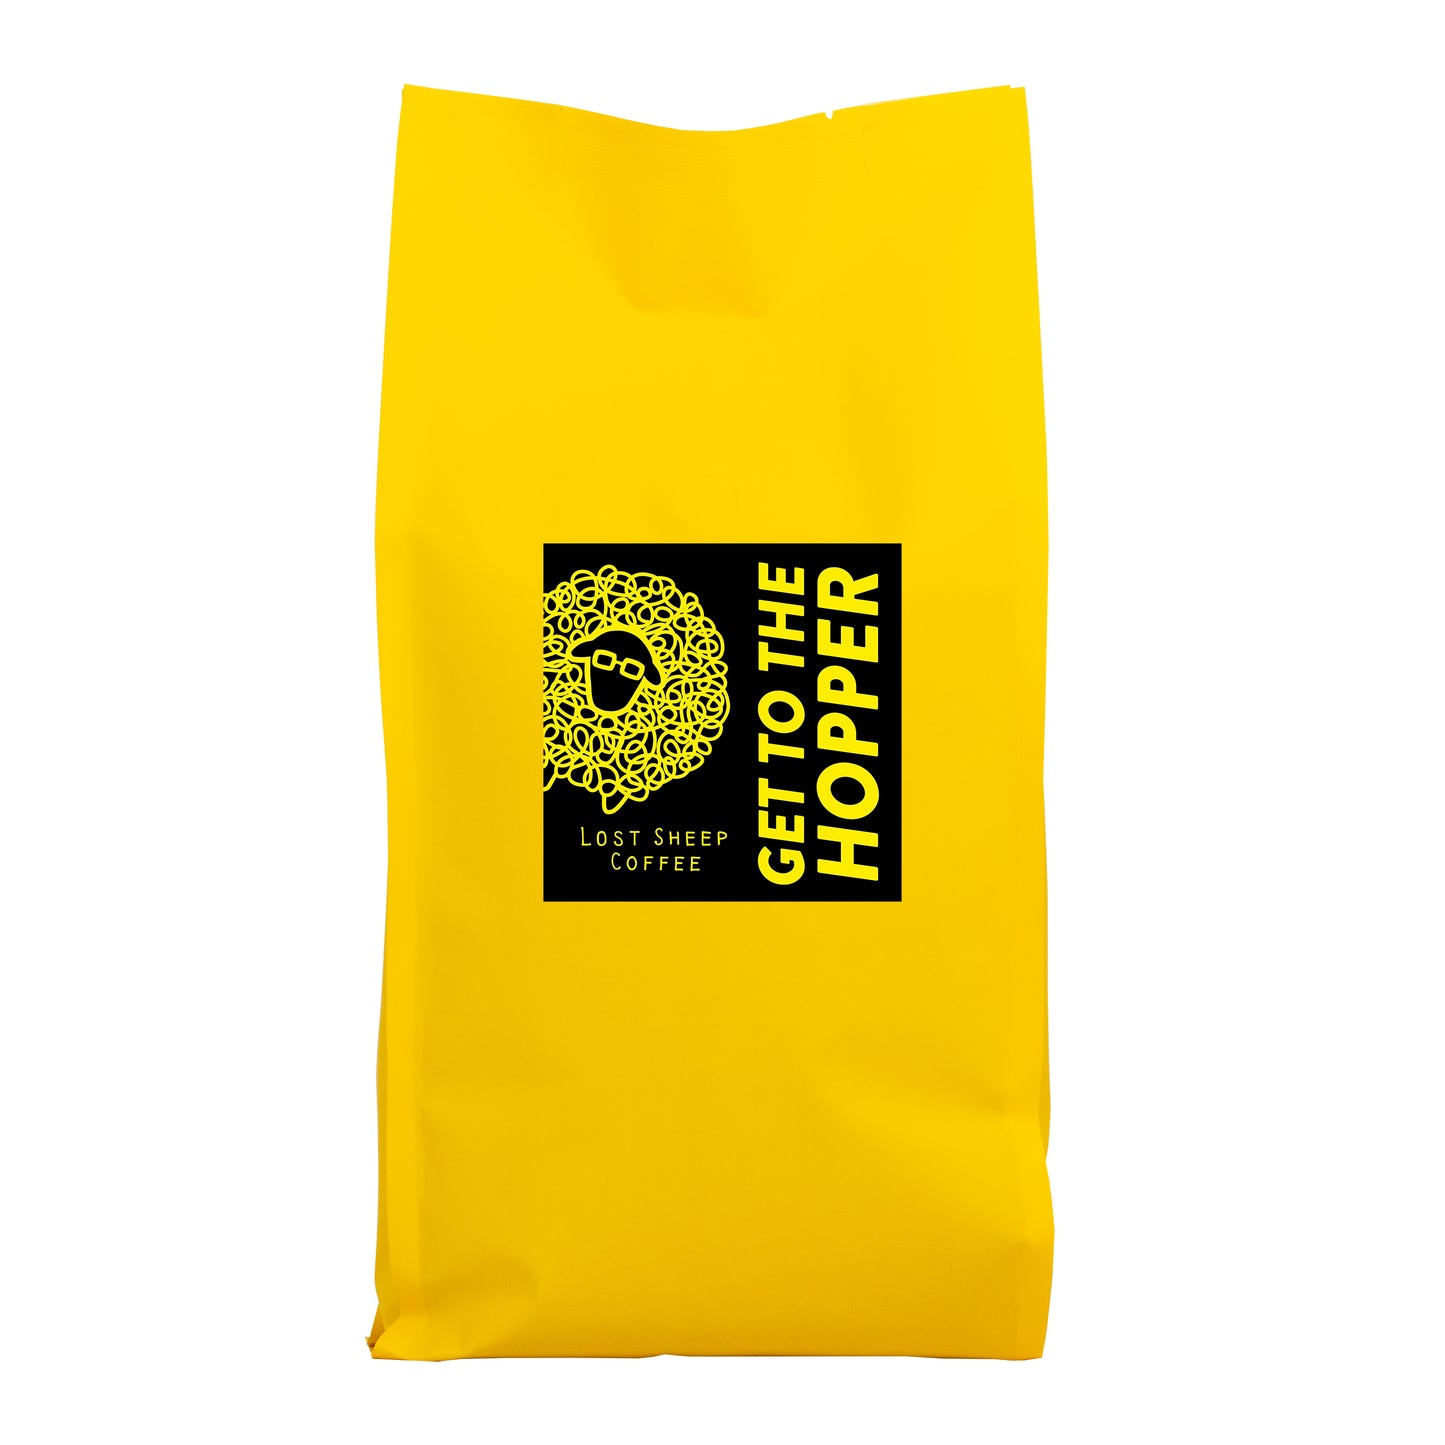 Lost Sheep Coffee: Get To The Hopper Blend 1KG bag